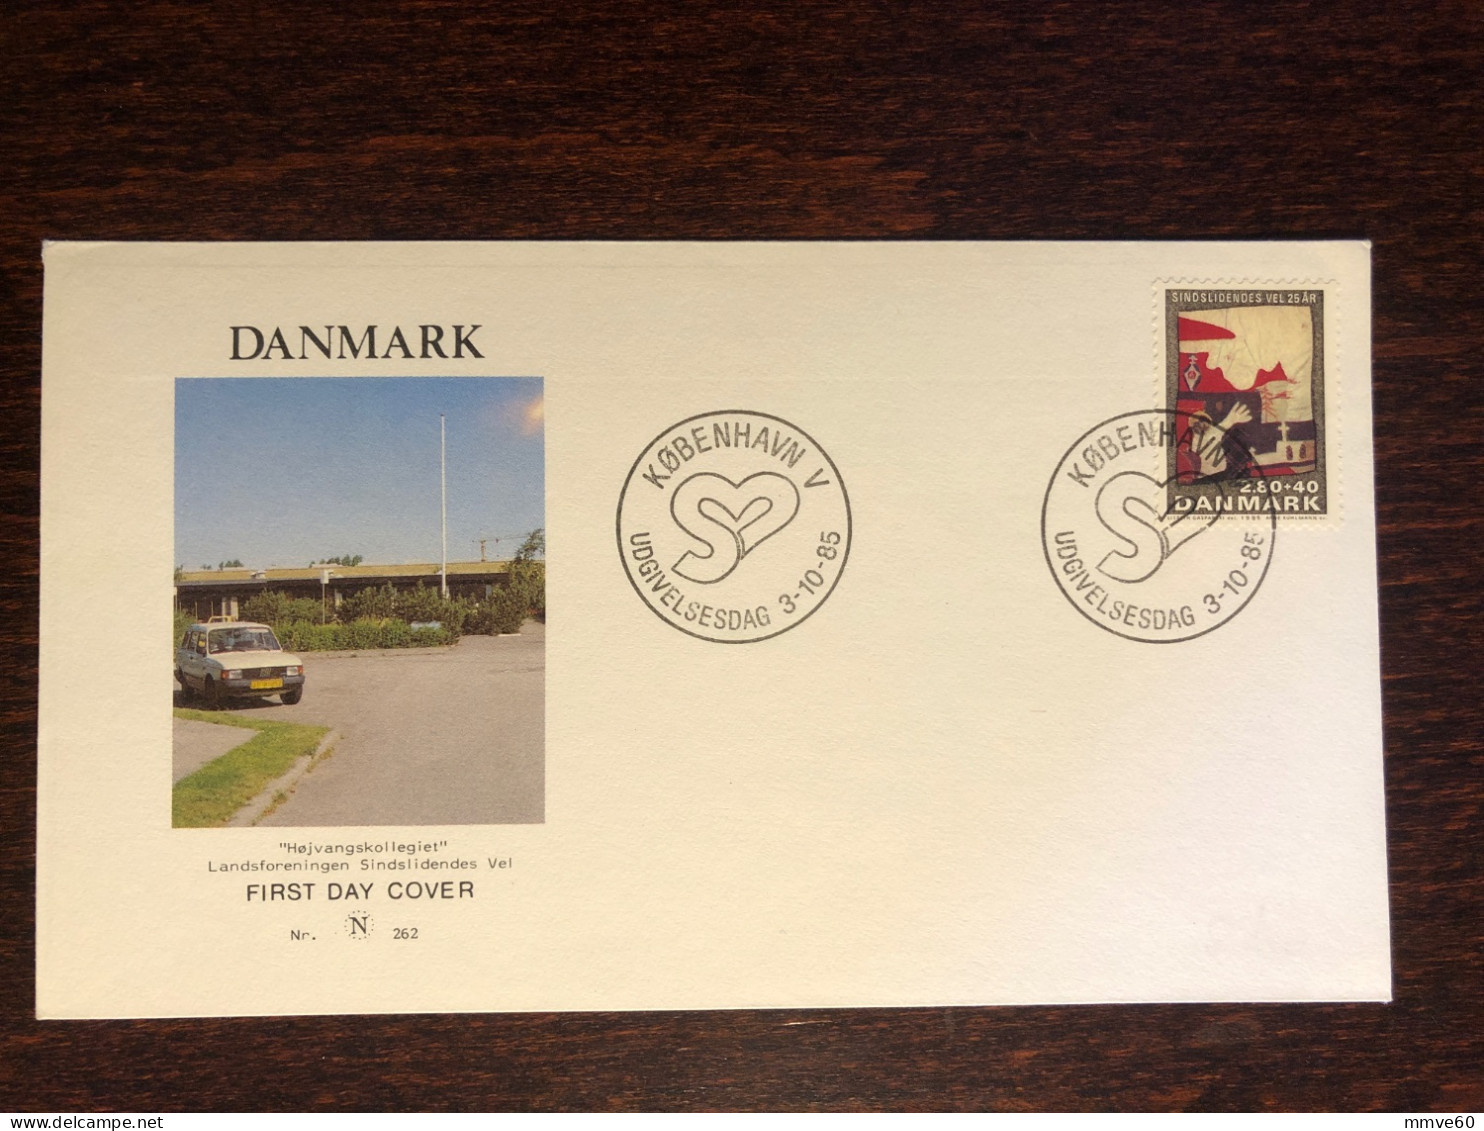 DENMARK FDC COVER 1985 YEAR MENTAL HOSPITAL PSYCHIATRY HEALTH MEDICINE STAMPS - FDC